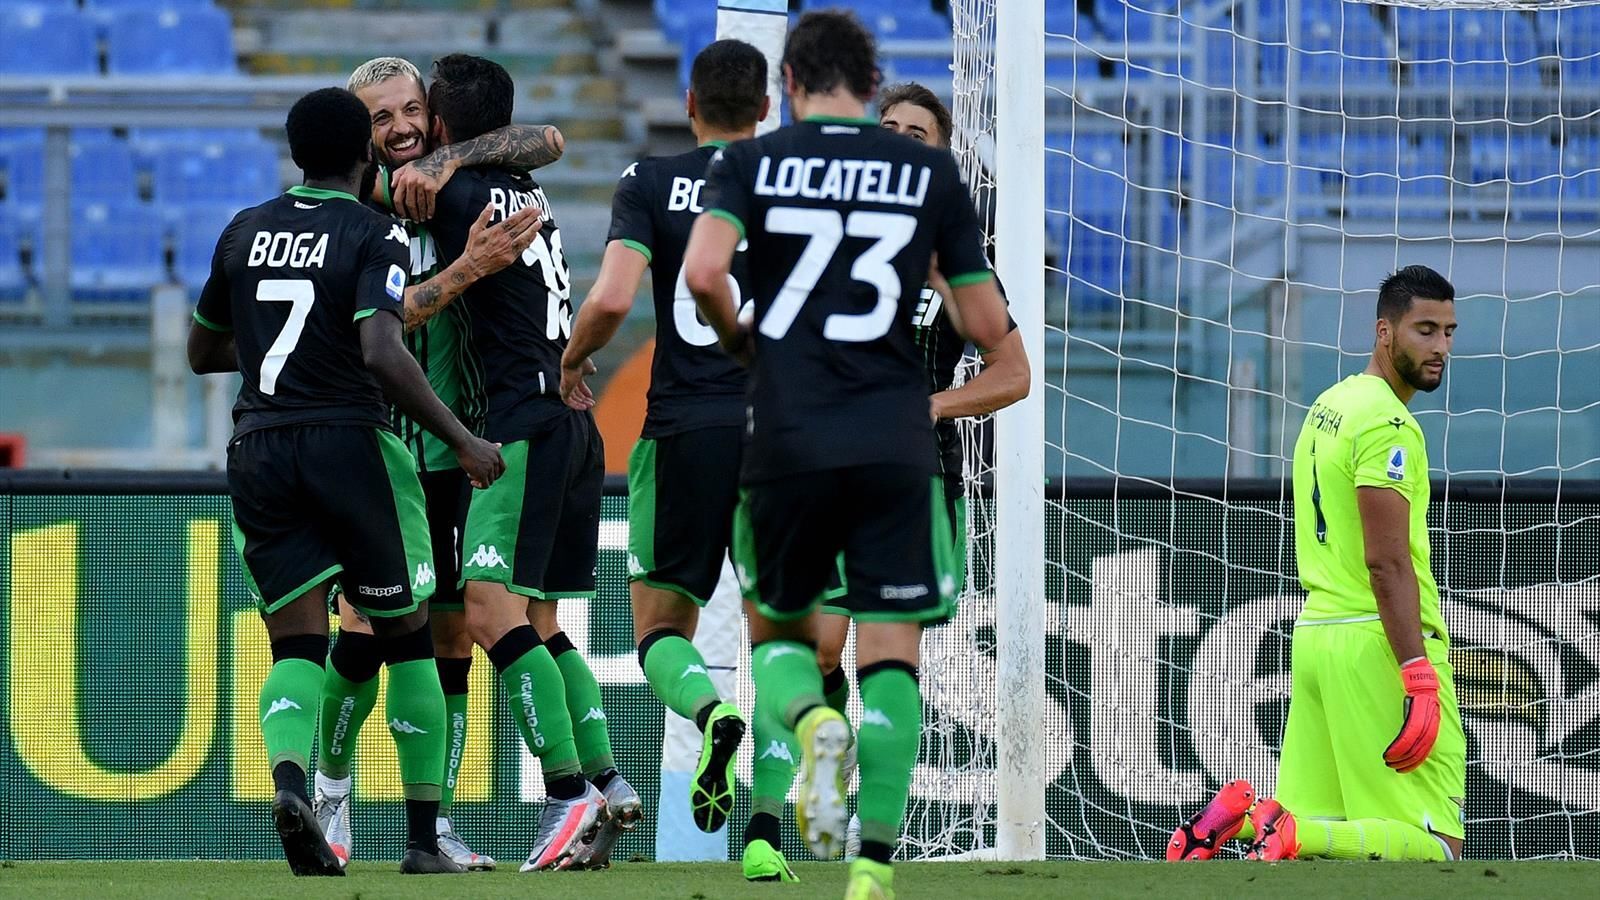 Sassuolo and Juventus Play an Action-packed Thriller Ending in a 3-3 Draw